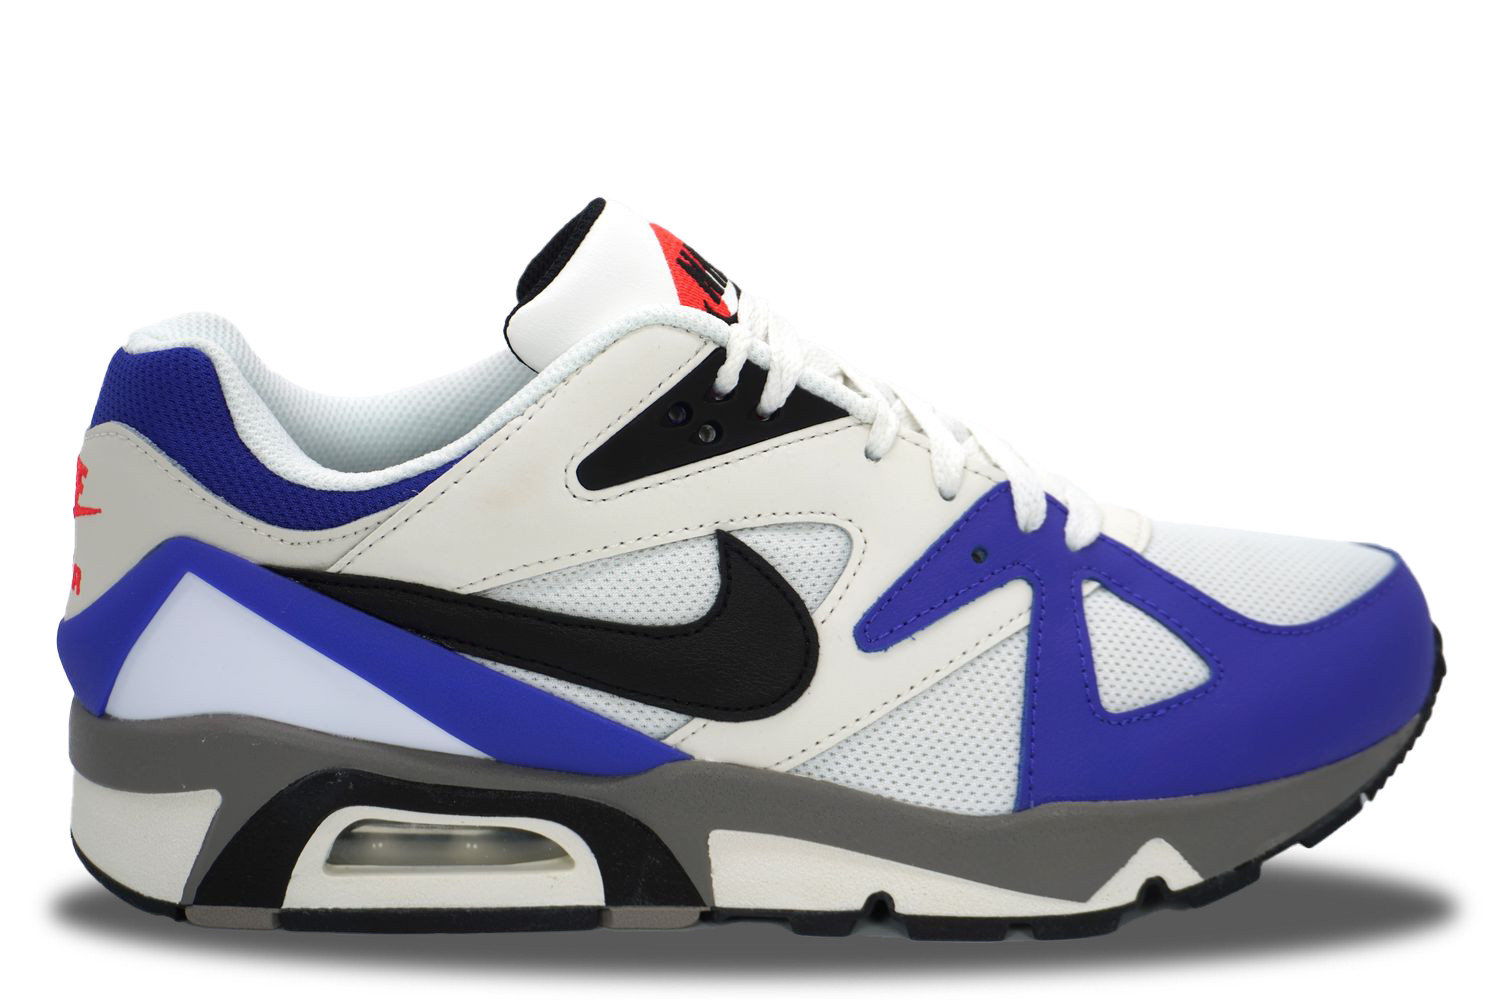 Nike Air Max Structure Triax 91 Persian Violet